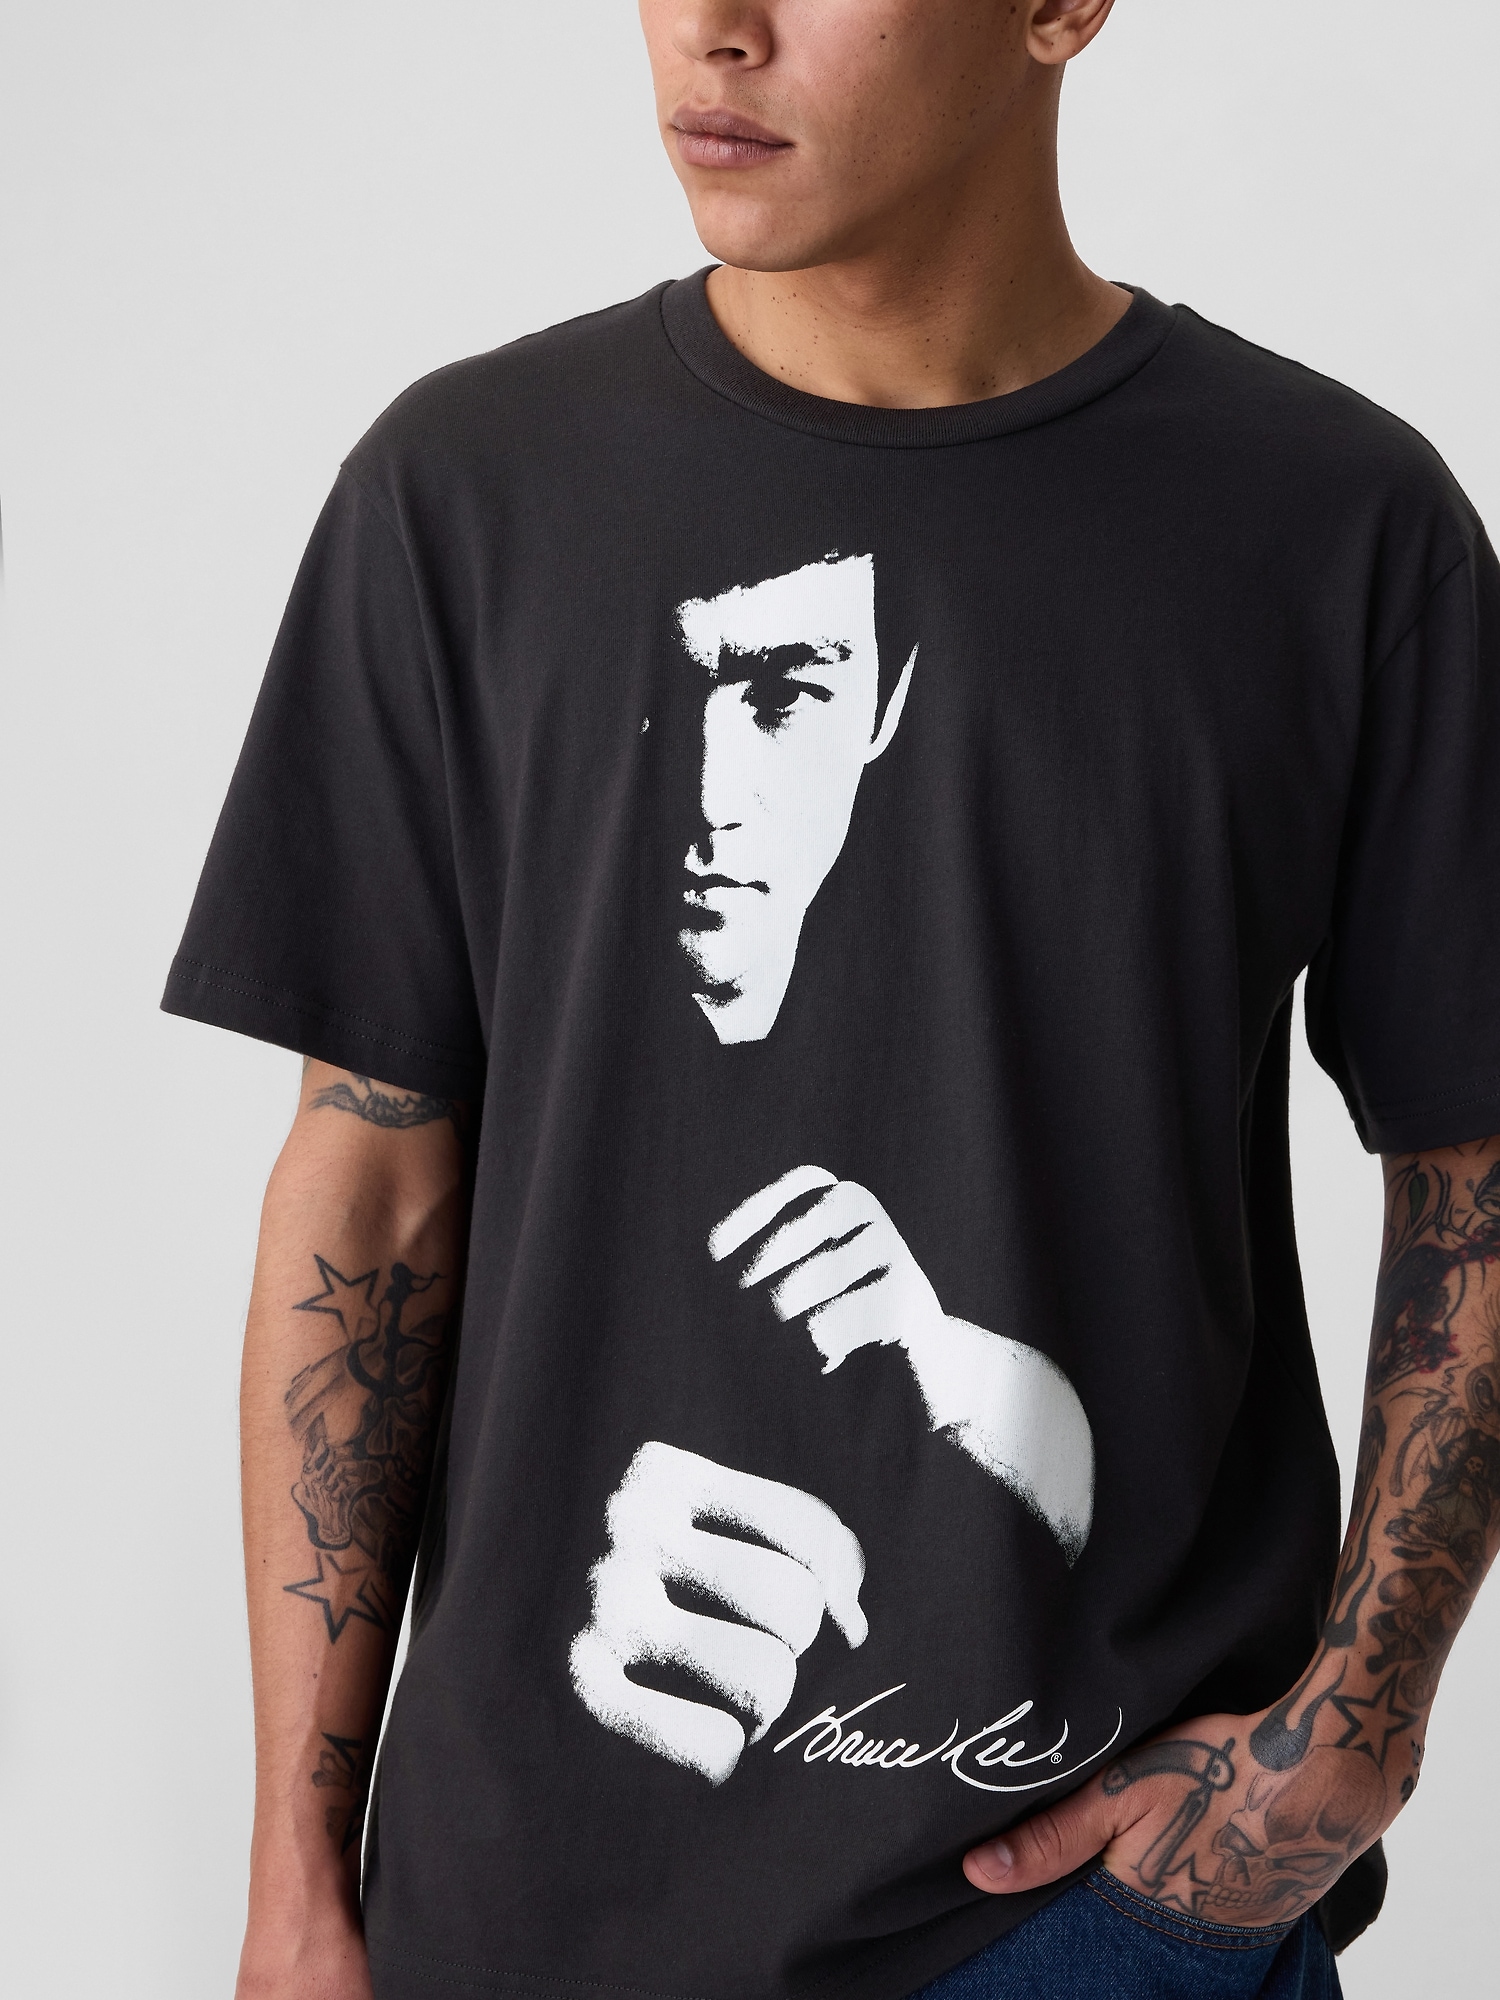 Bruce Lee Graphic T-Shirt